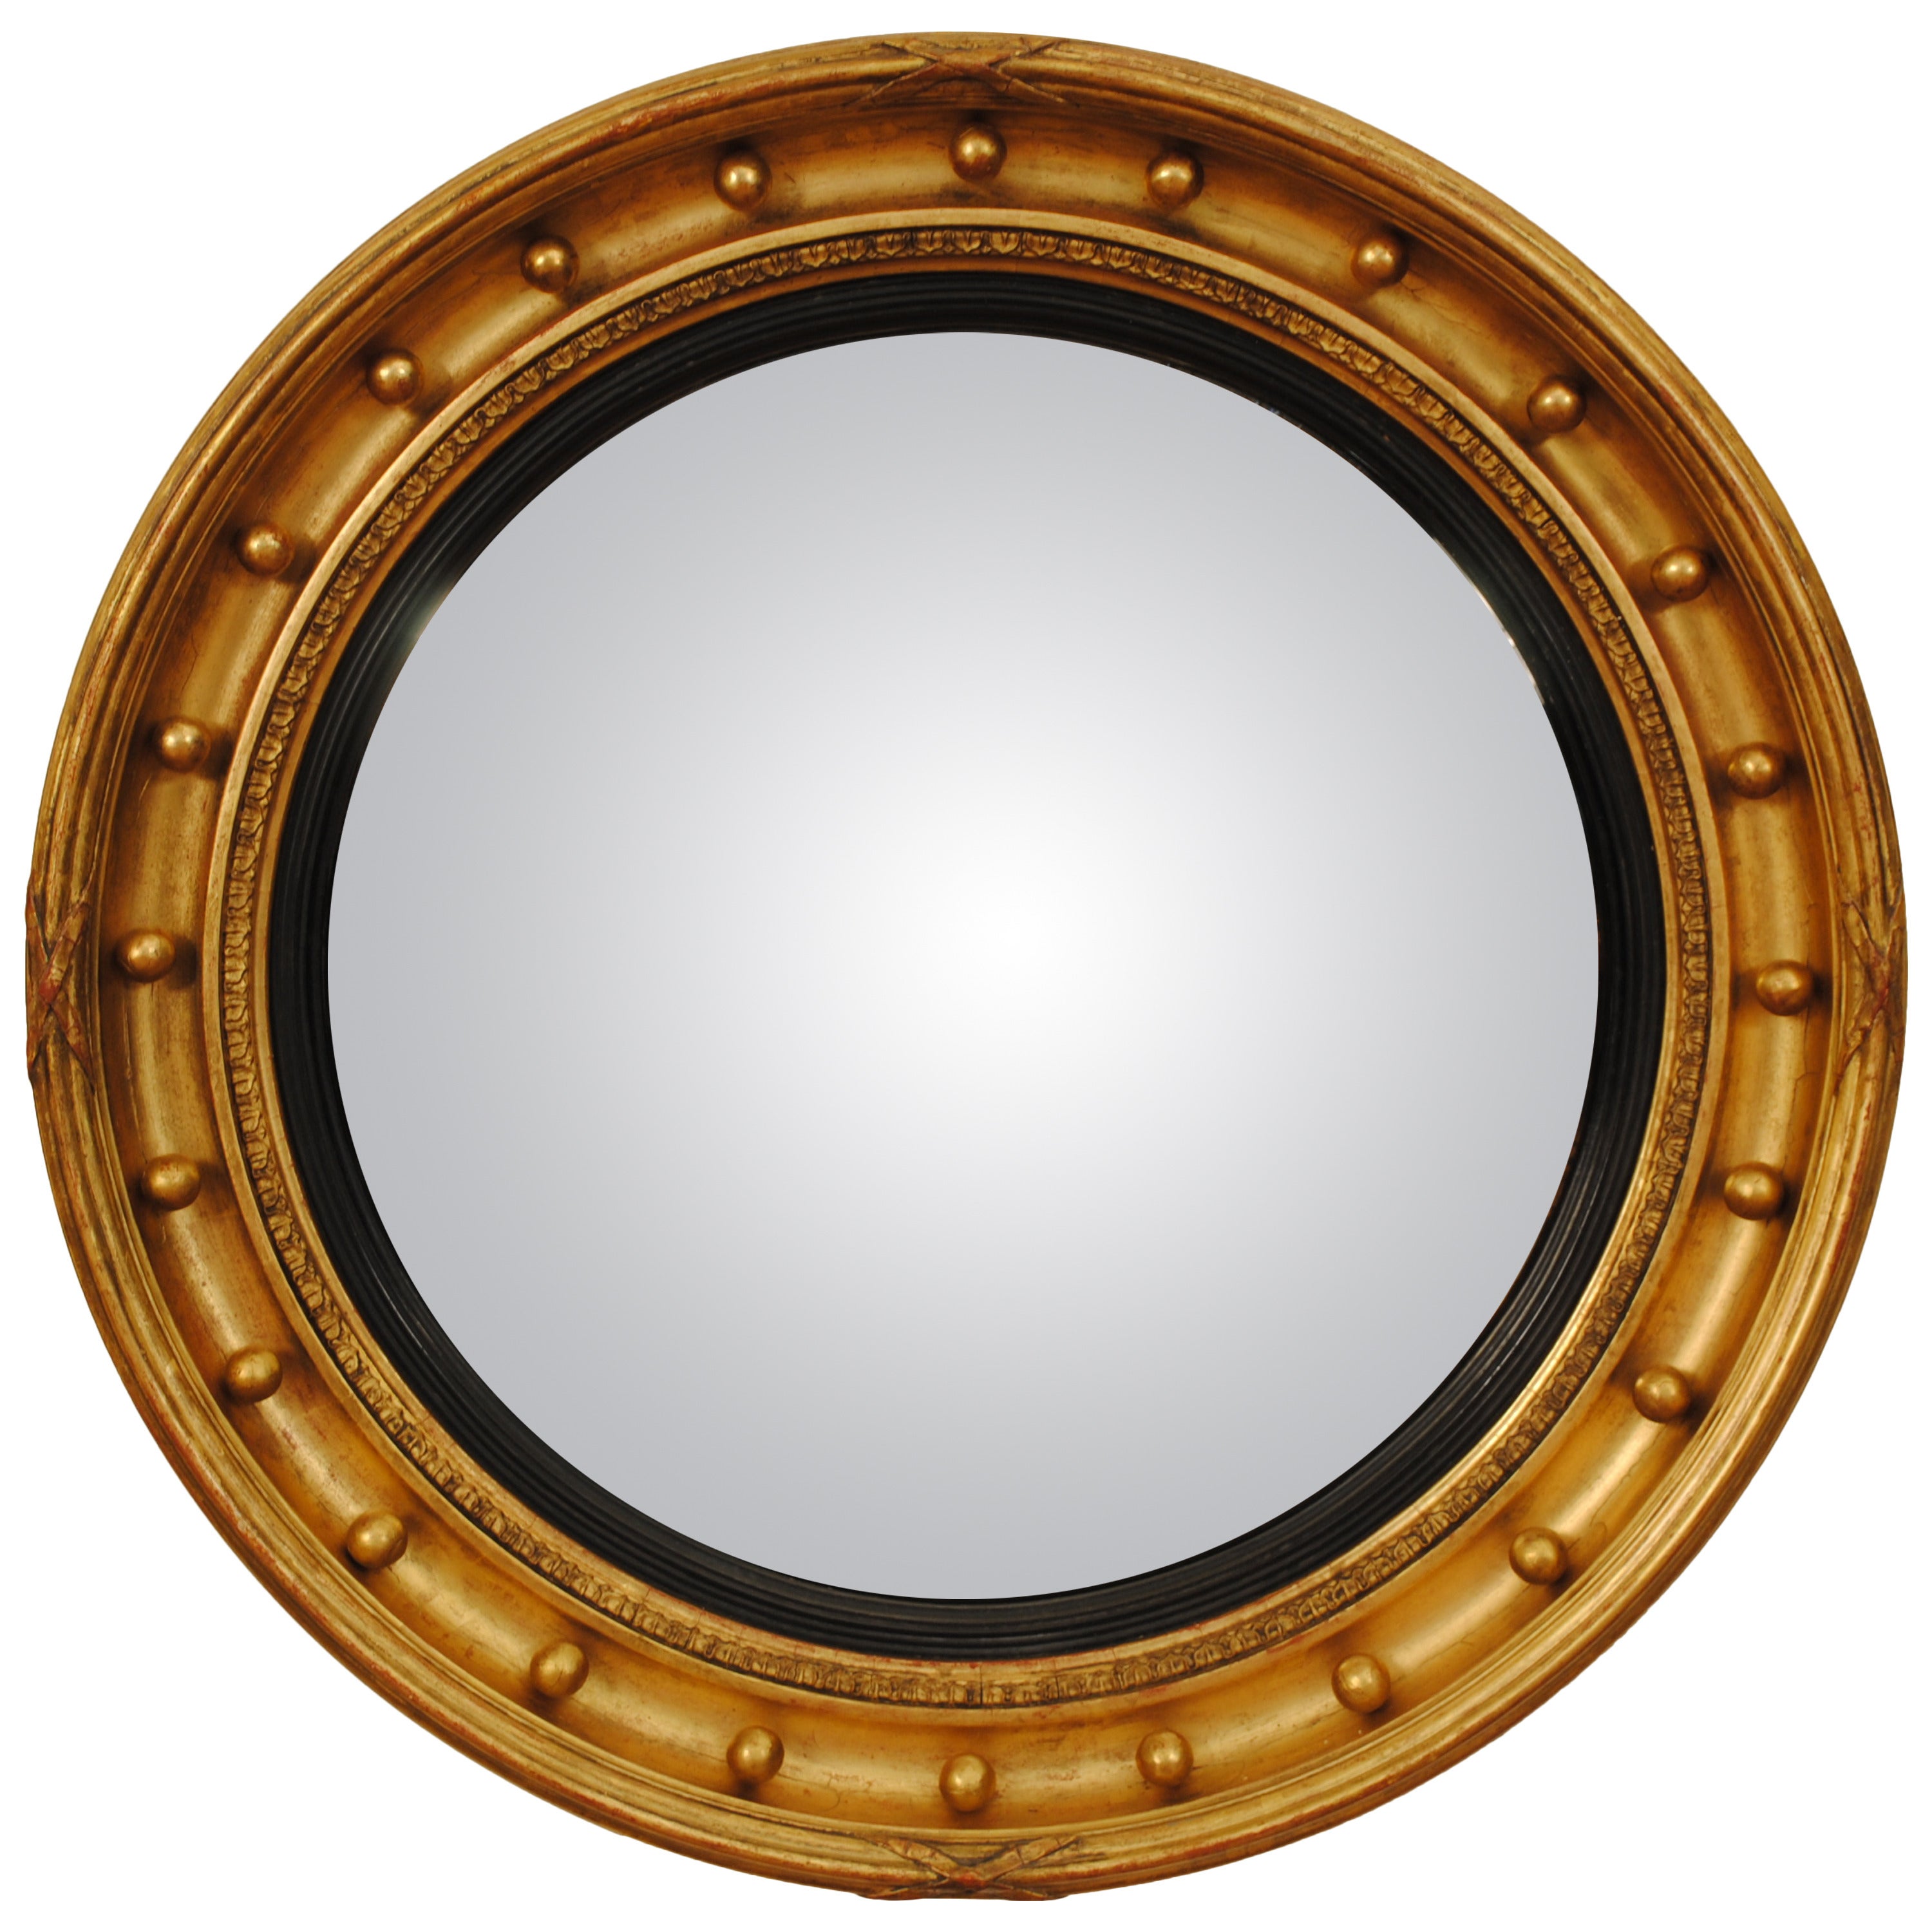 French, Neoclassical Round Giltwood Mirror with Original Convex Mirrorplate